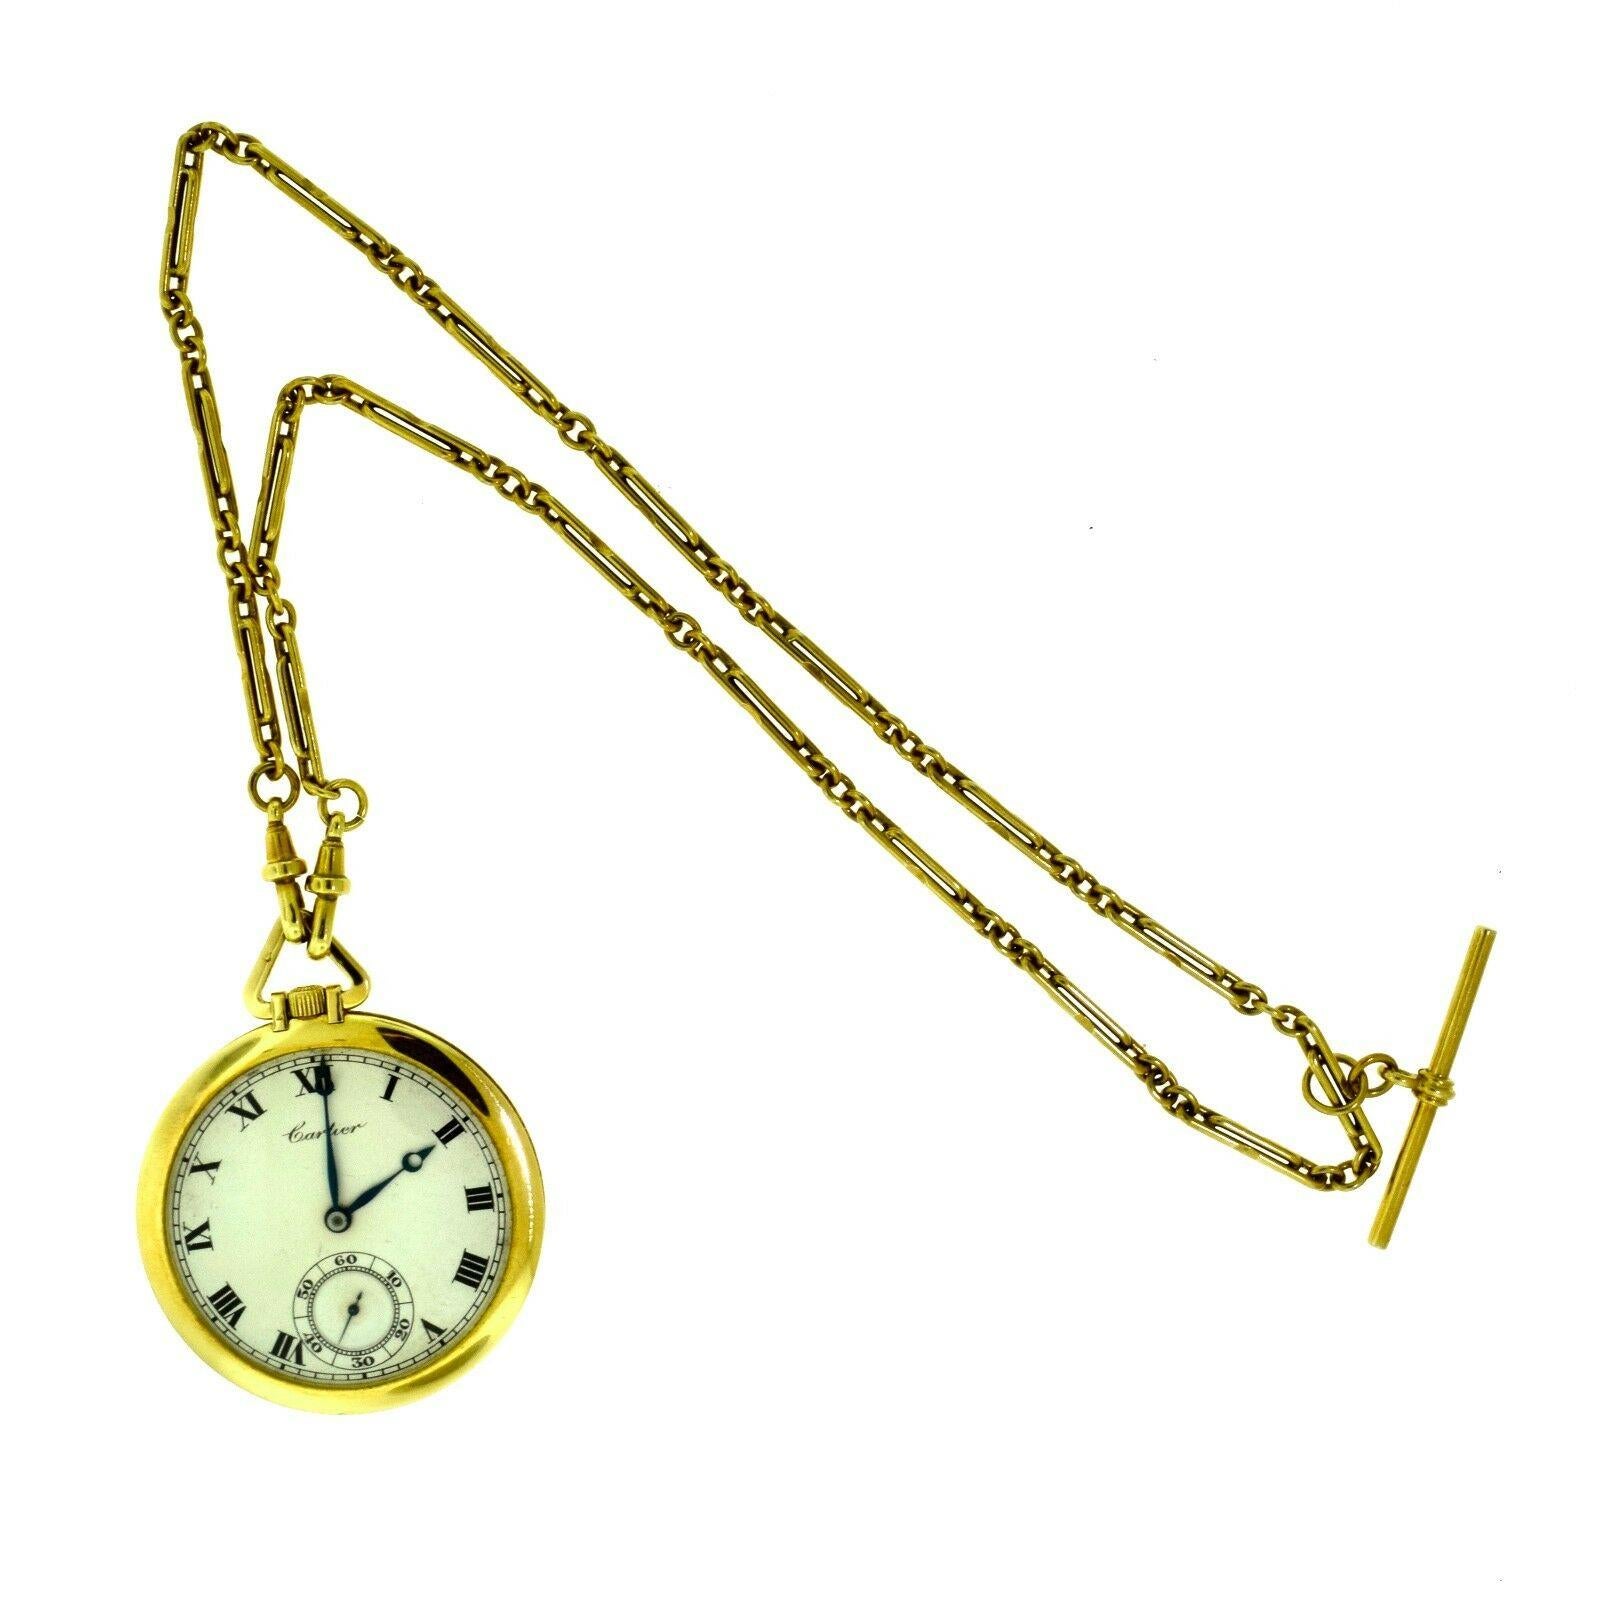 Brilliance Jewels, Miami
Questions? Call Us Anytime!
786,482,8100

Designer: Cartier
Metal: 18k Yellow Gold
Chain Length: 19 inches
Case Size: 45 mm
Total Item Weight (g): 84.3
Cartier pocket watch from 1925/1935
European watch and clock